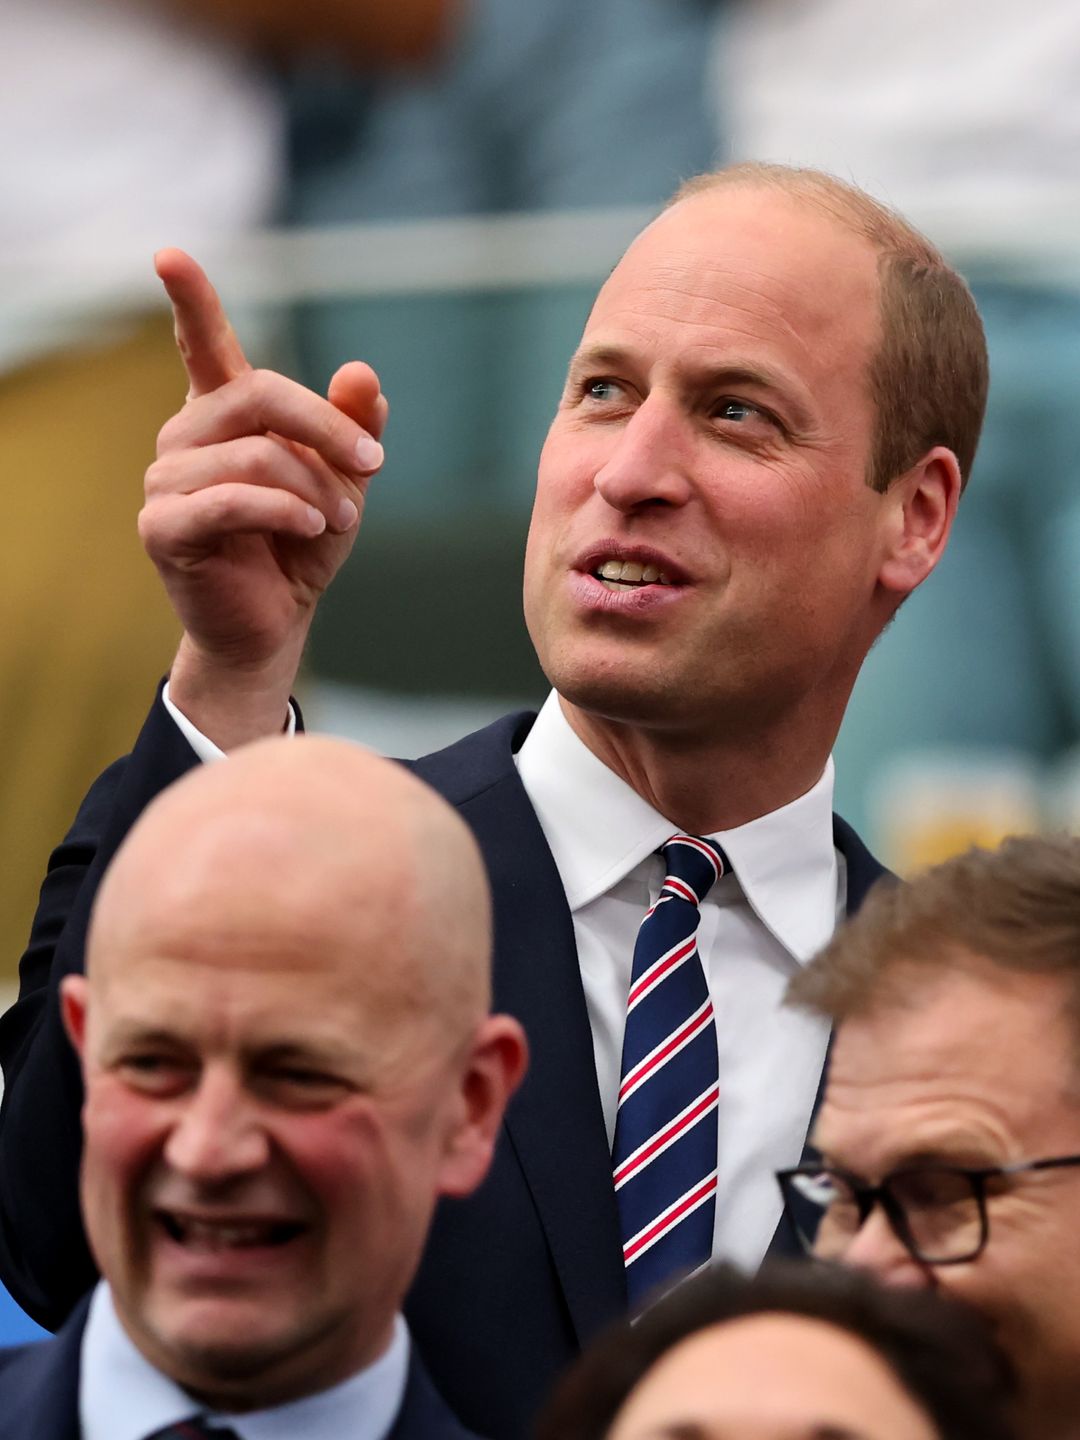 Prince William pointing while alongside King Frederik at football match